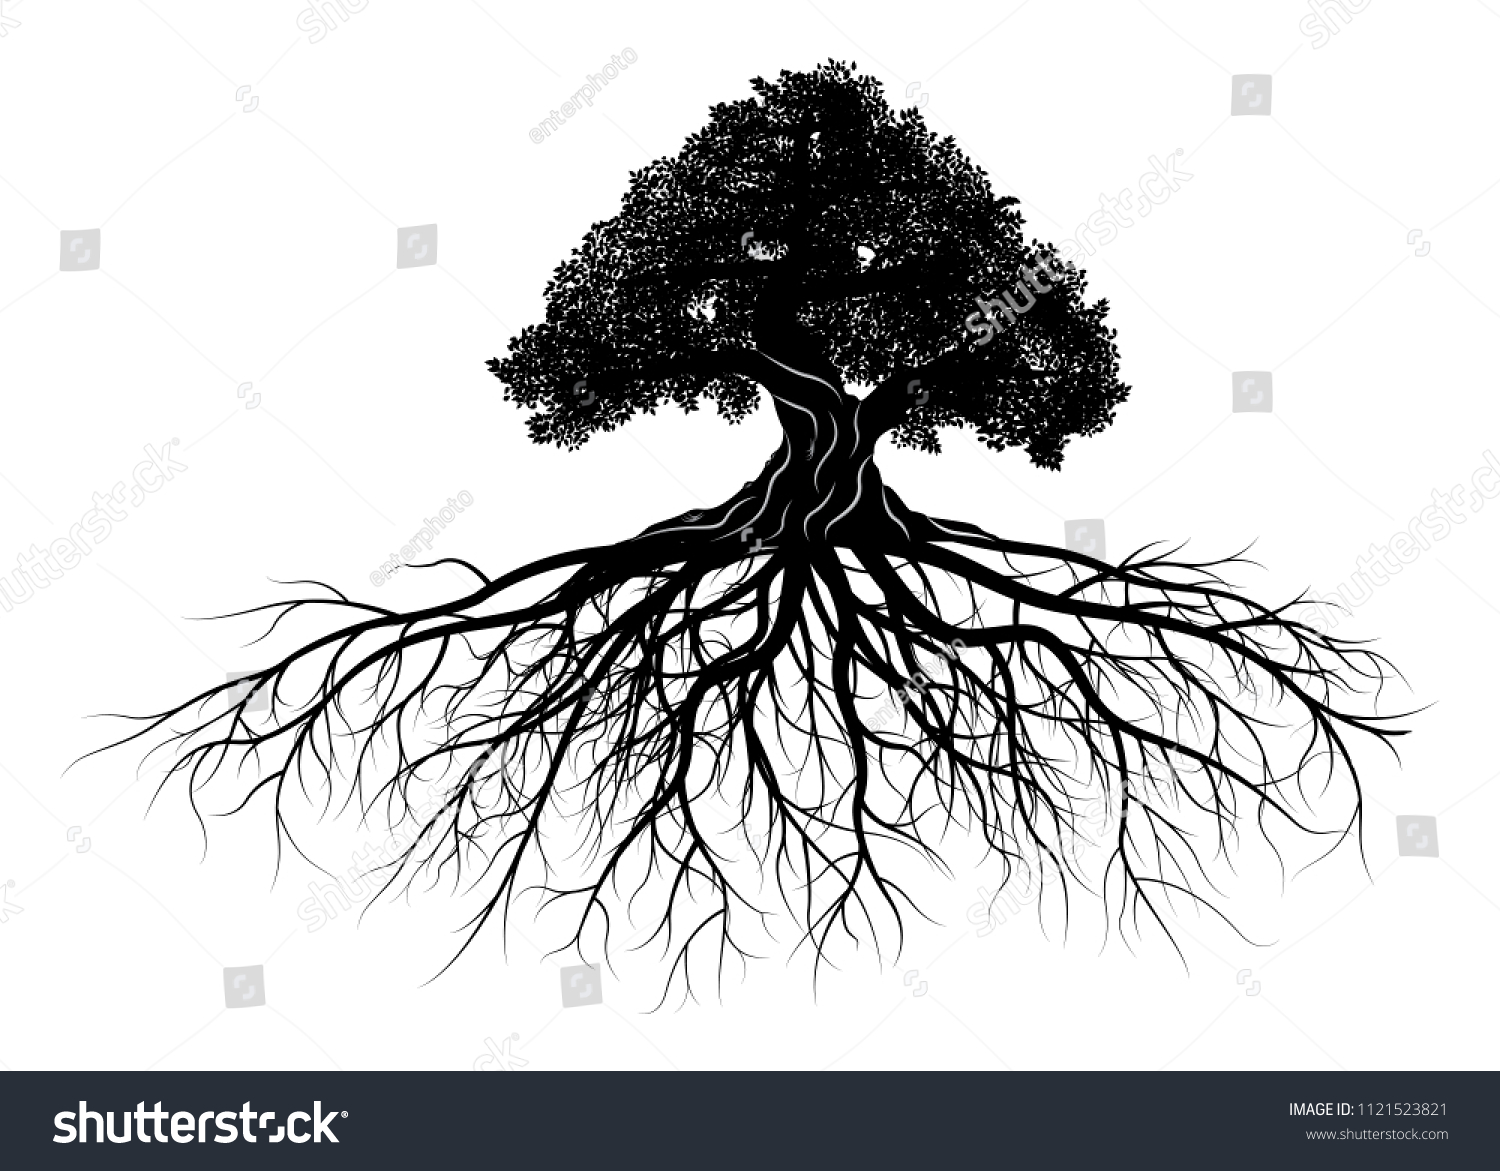 tree silhouette on white background. Vector illustration. #1121523821